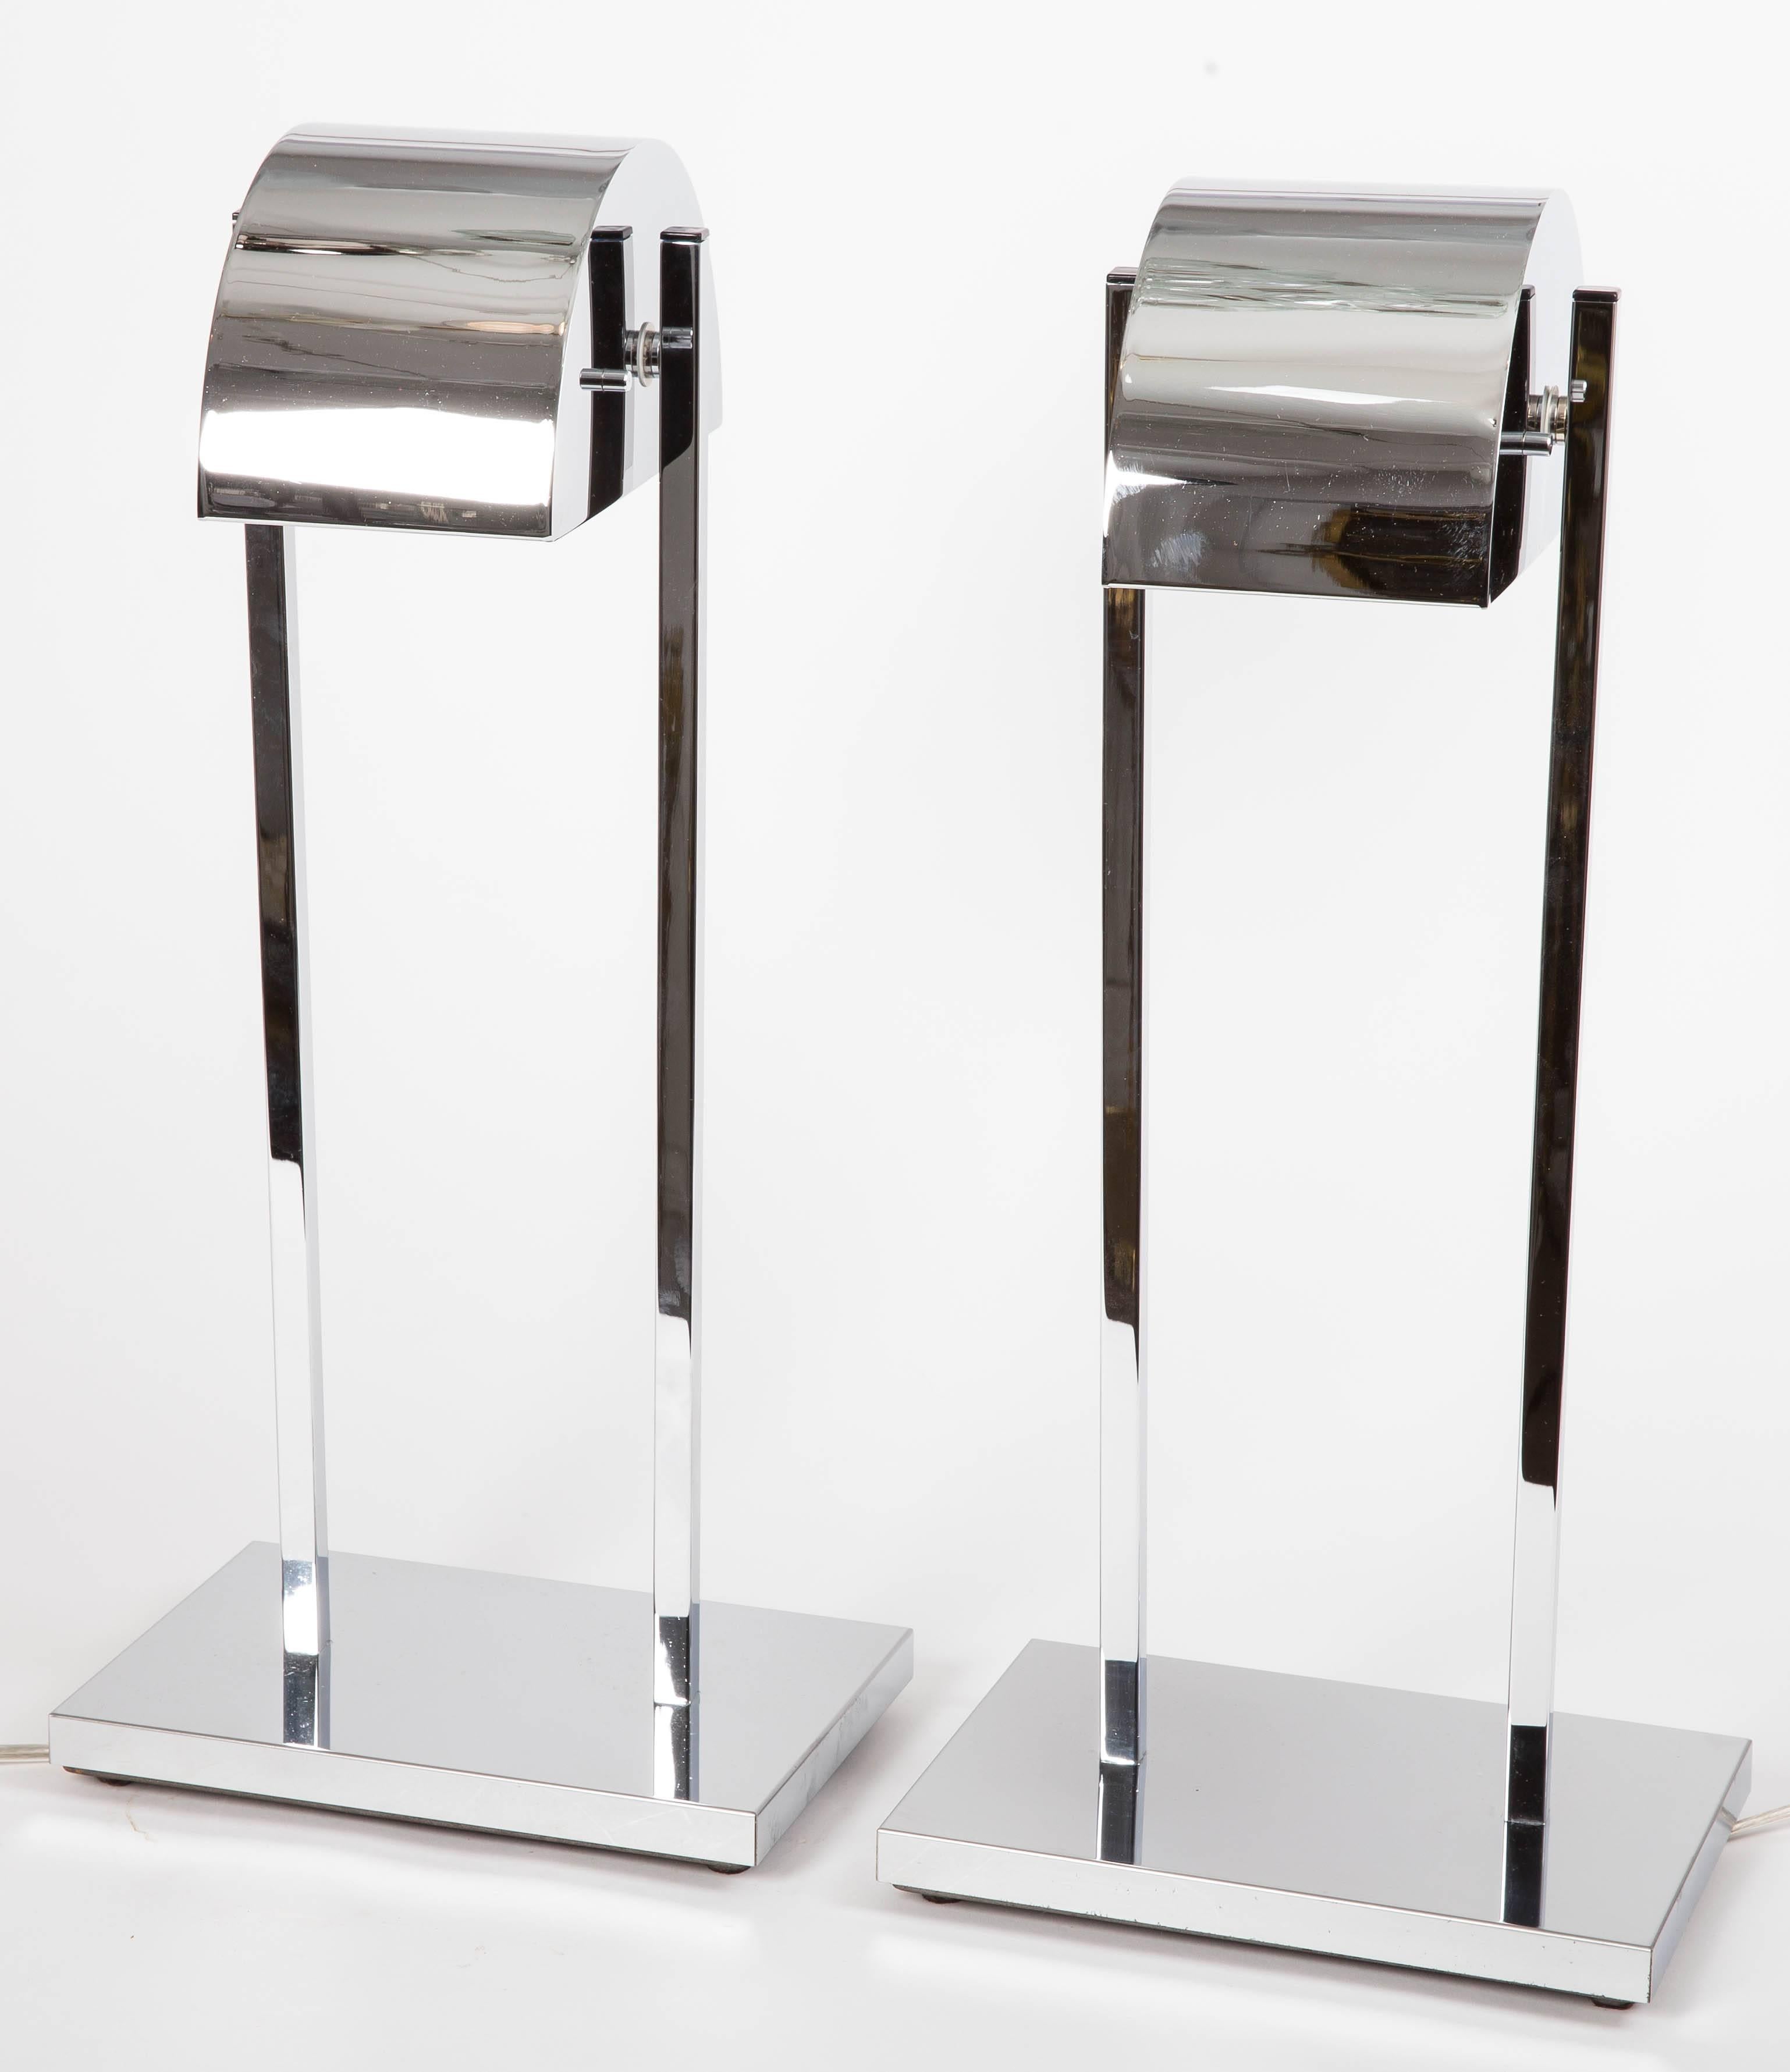 Pair of chrome table lamps with rotating canopy and dimmer by Kovacs.